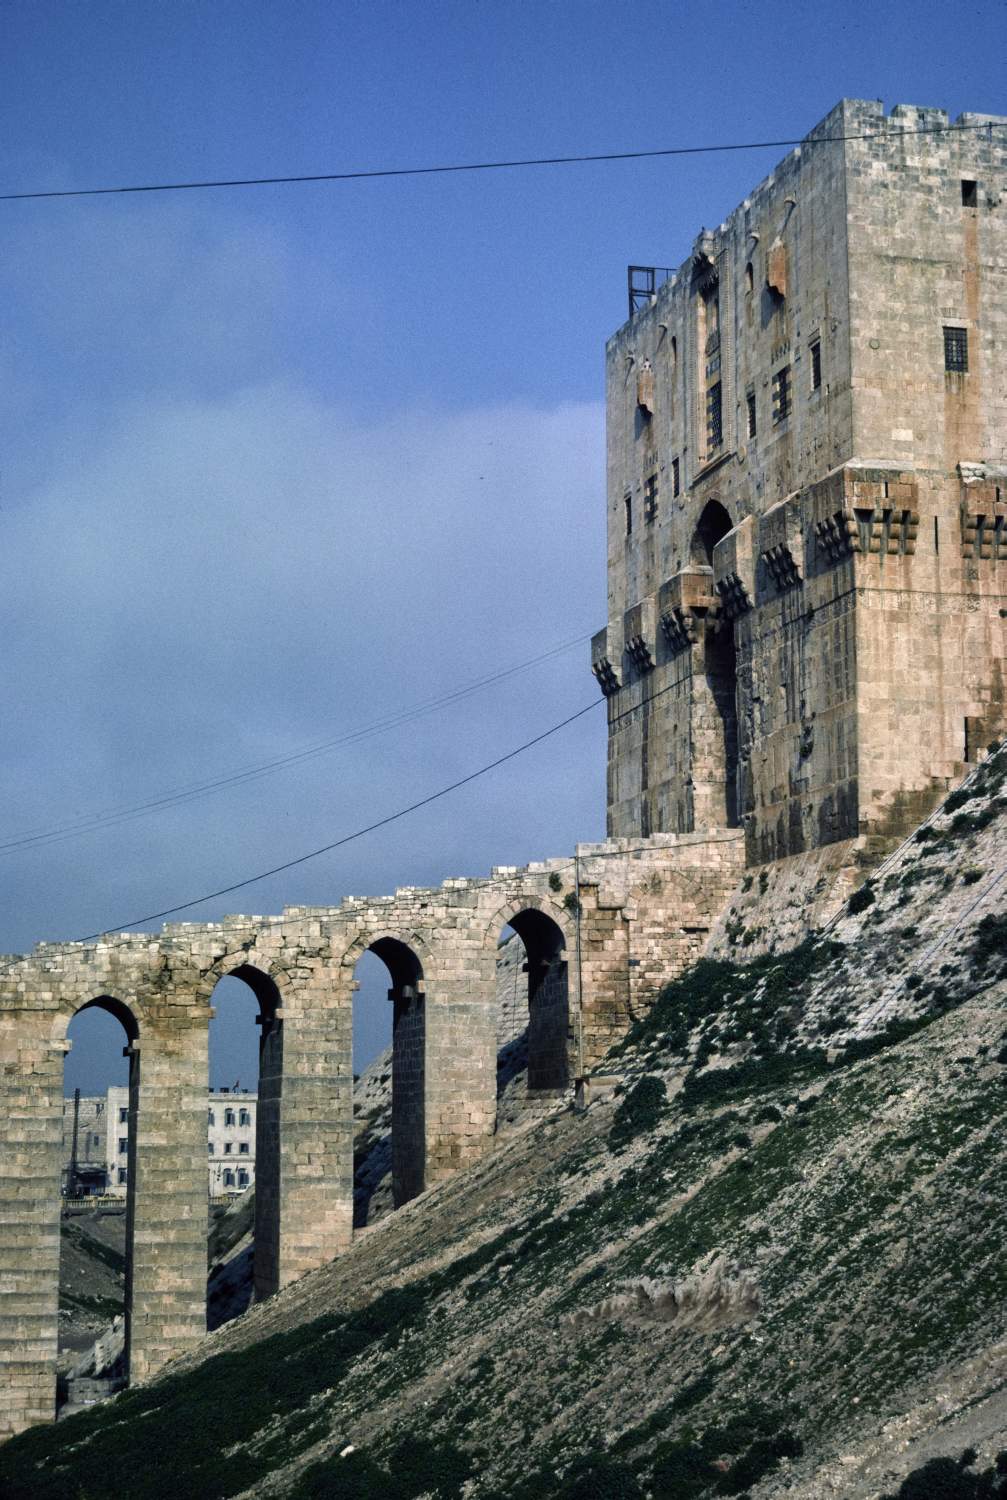 View of viaduct and upper tower from east.